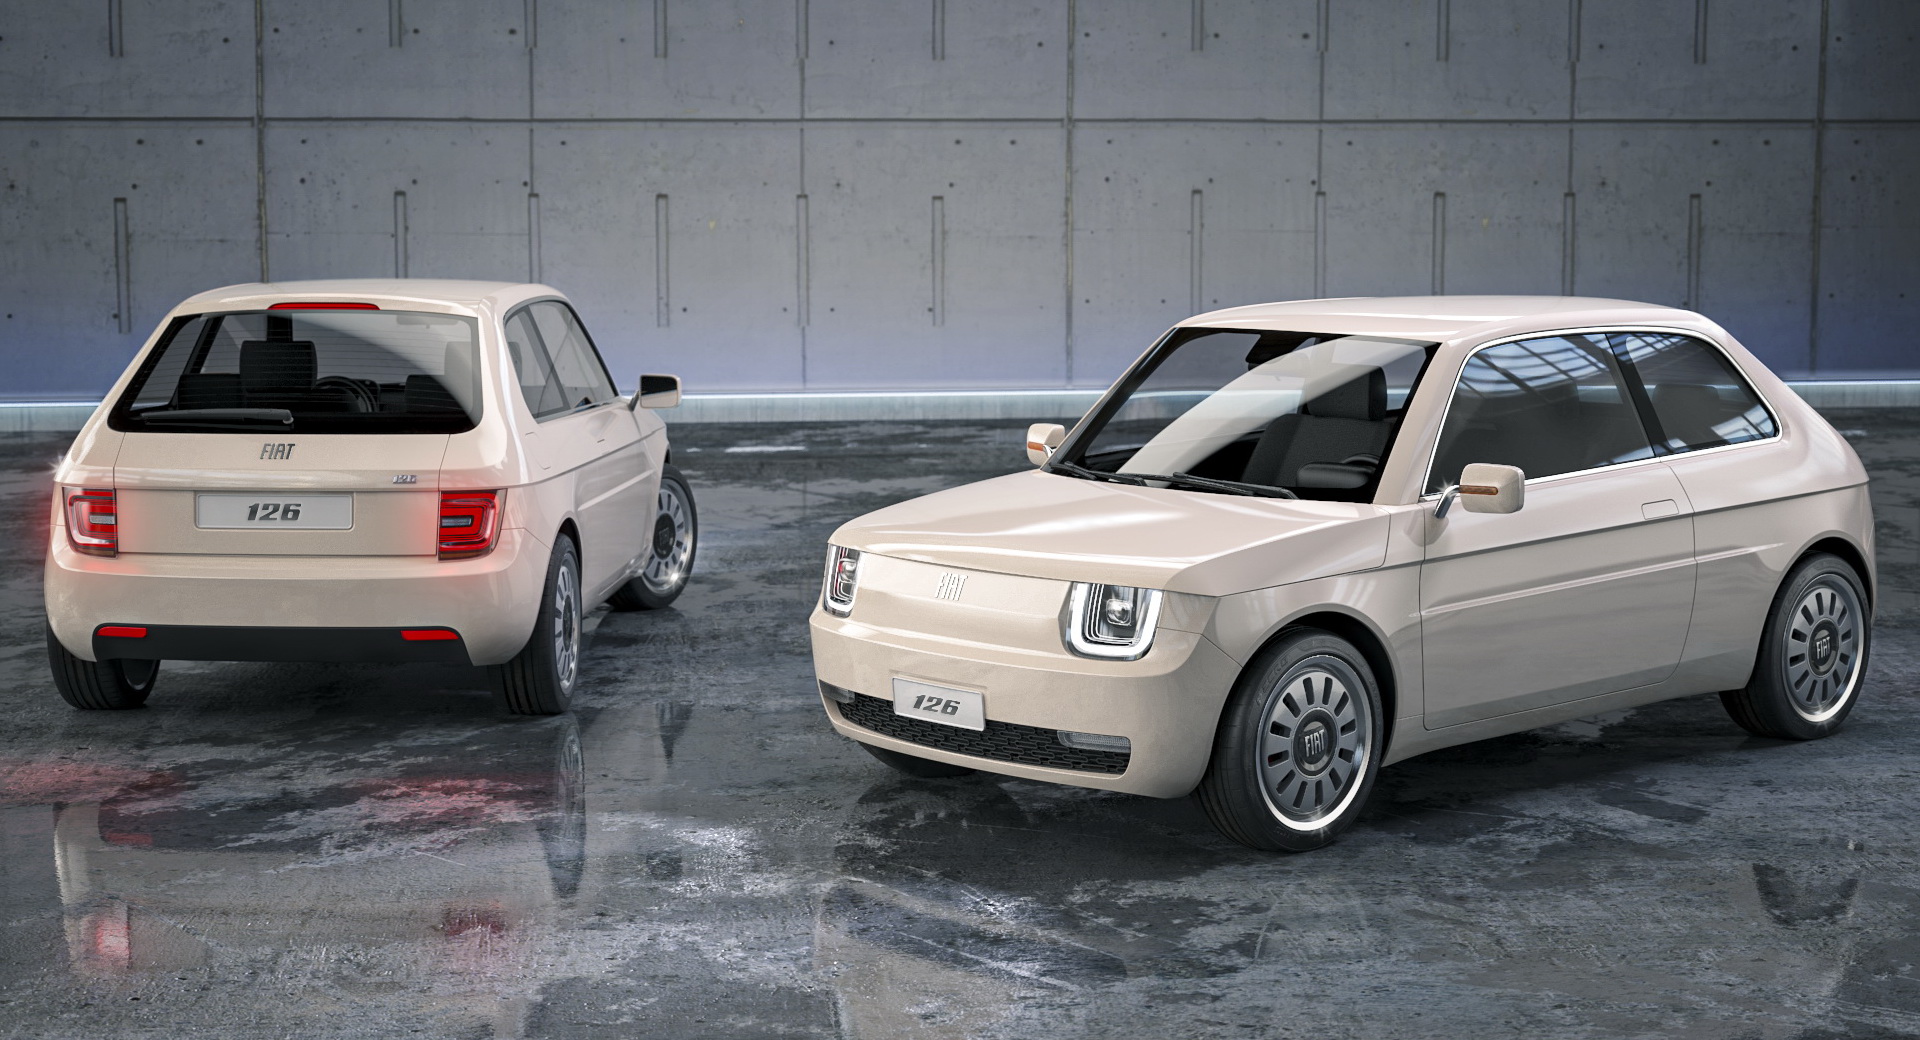 Reviving The Fiat 126 As A Modern Electric City Car Is Pure Eye Candy